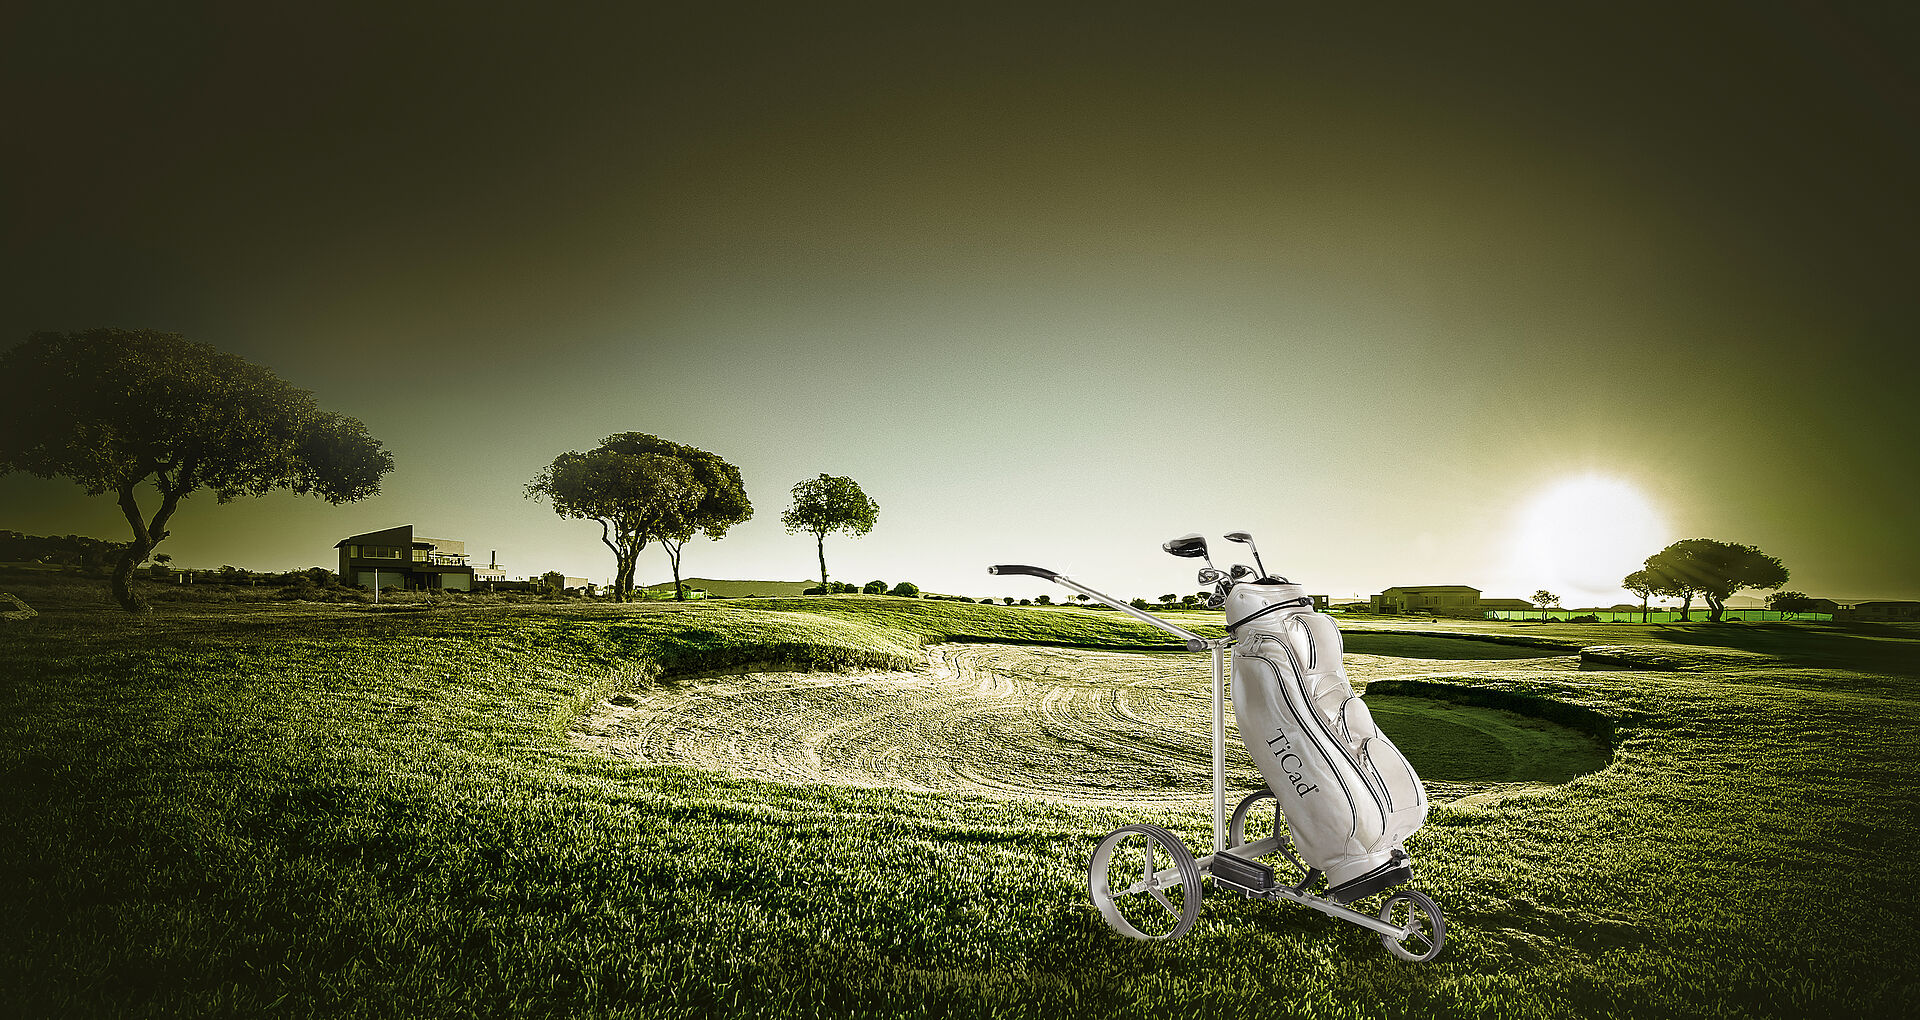 Lightweight and manoeuvrable golf trolley